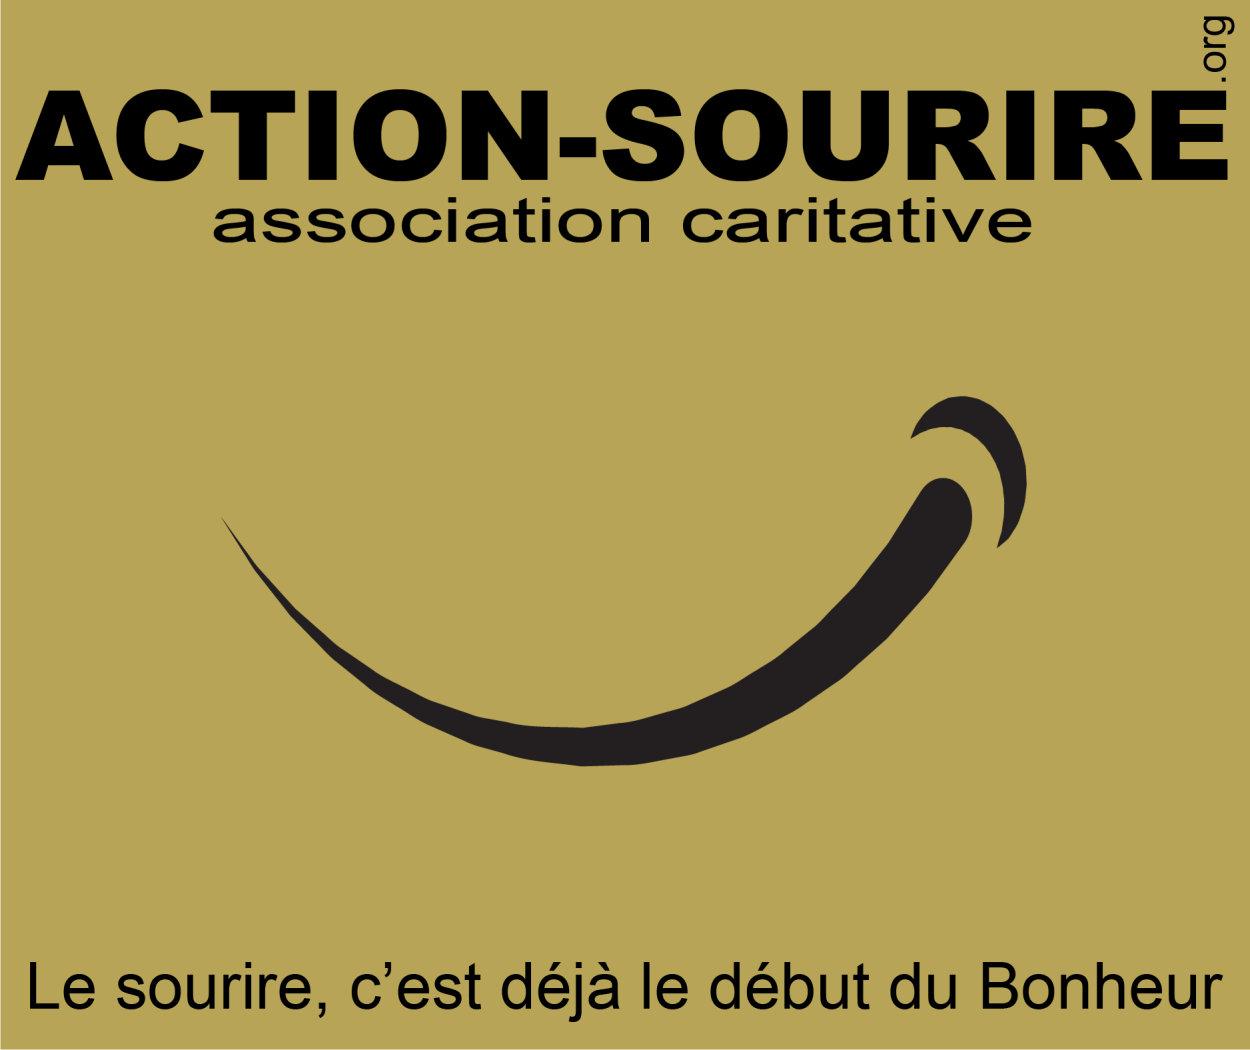 Actionsourire